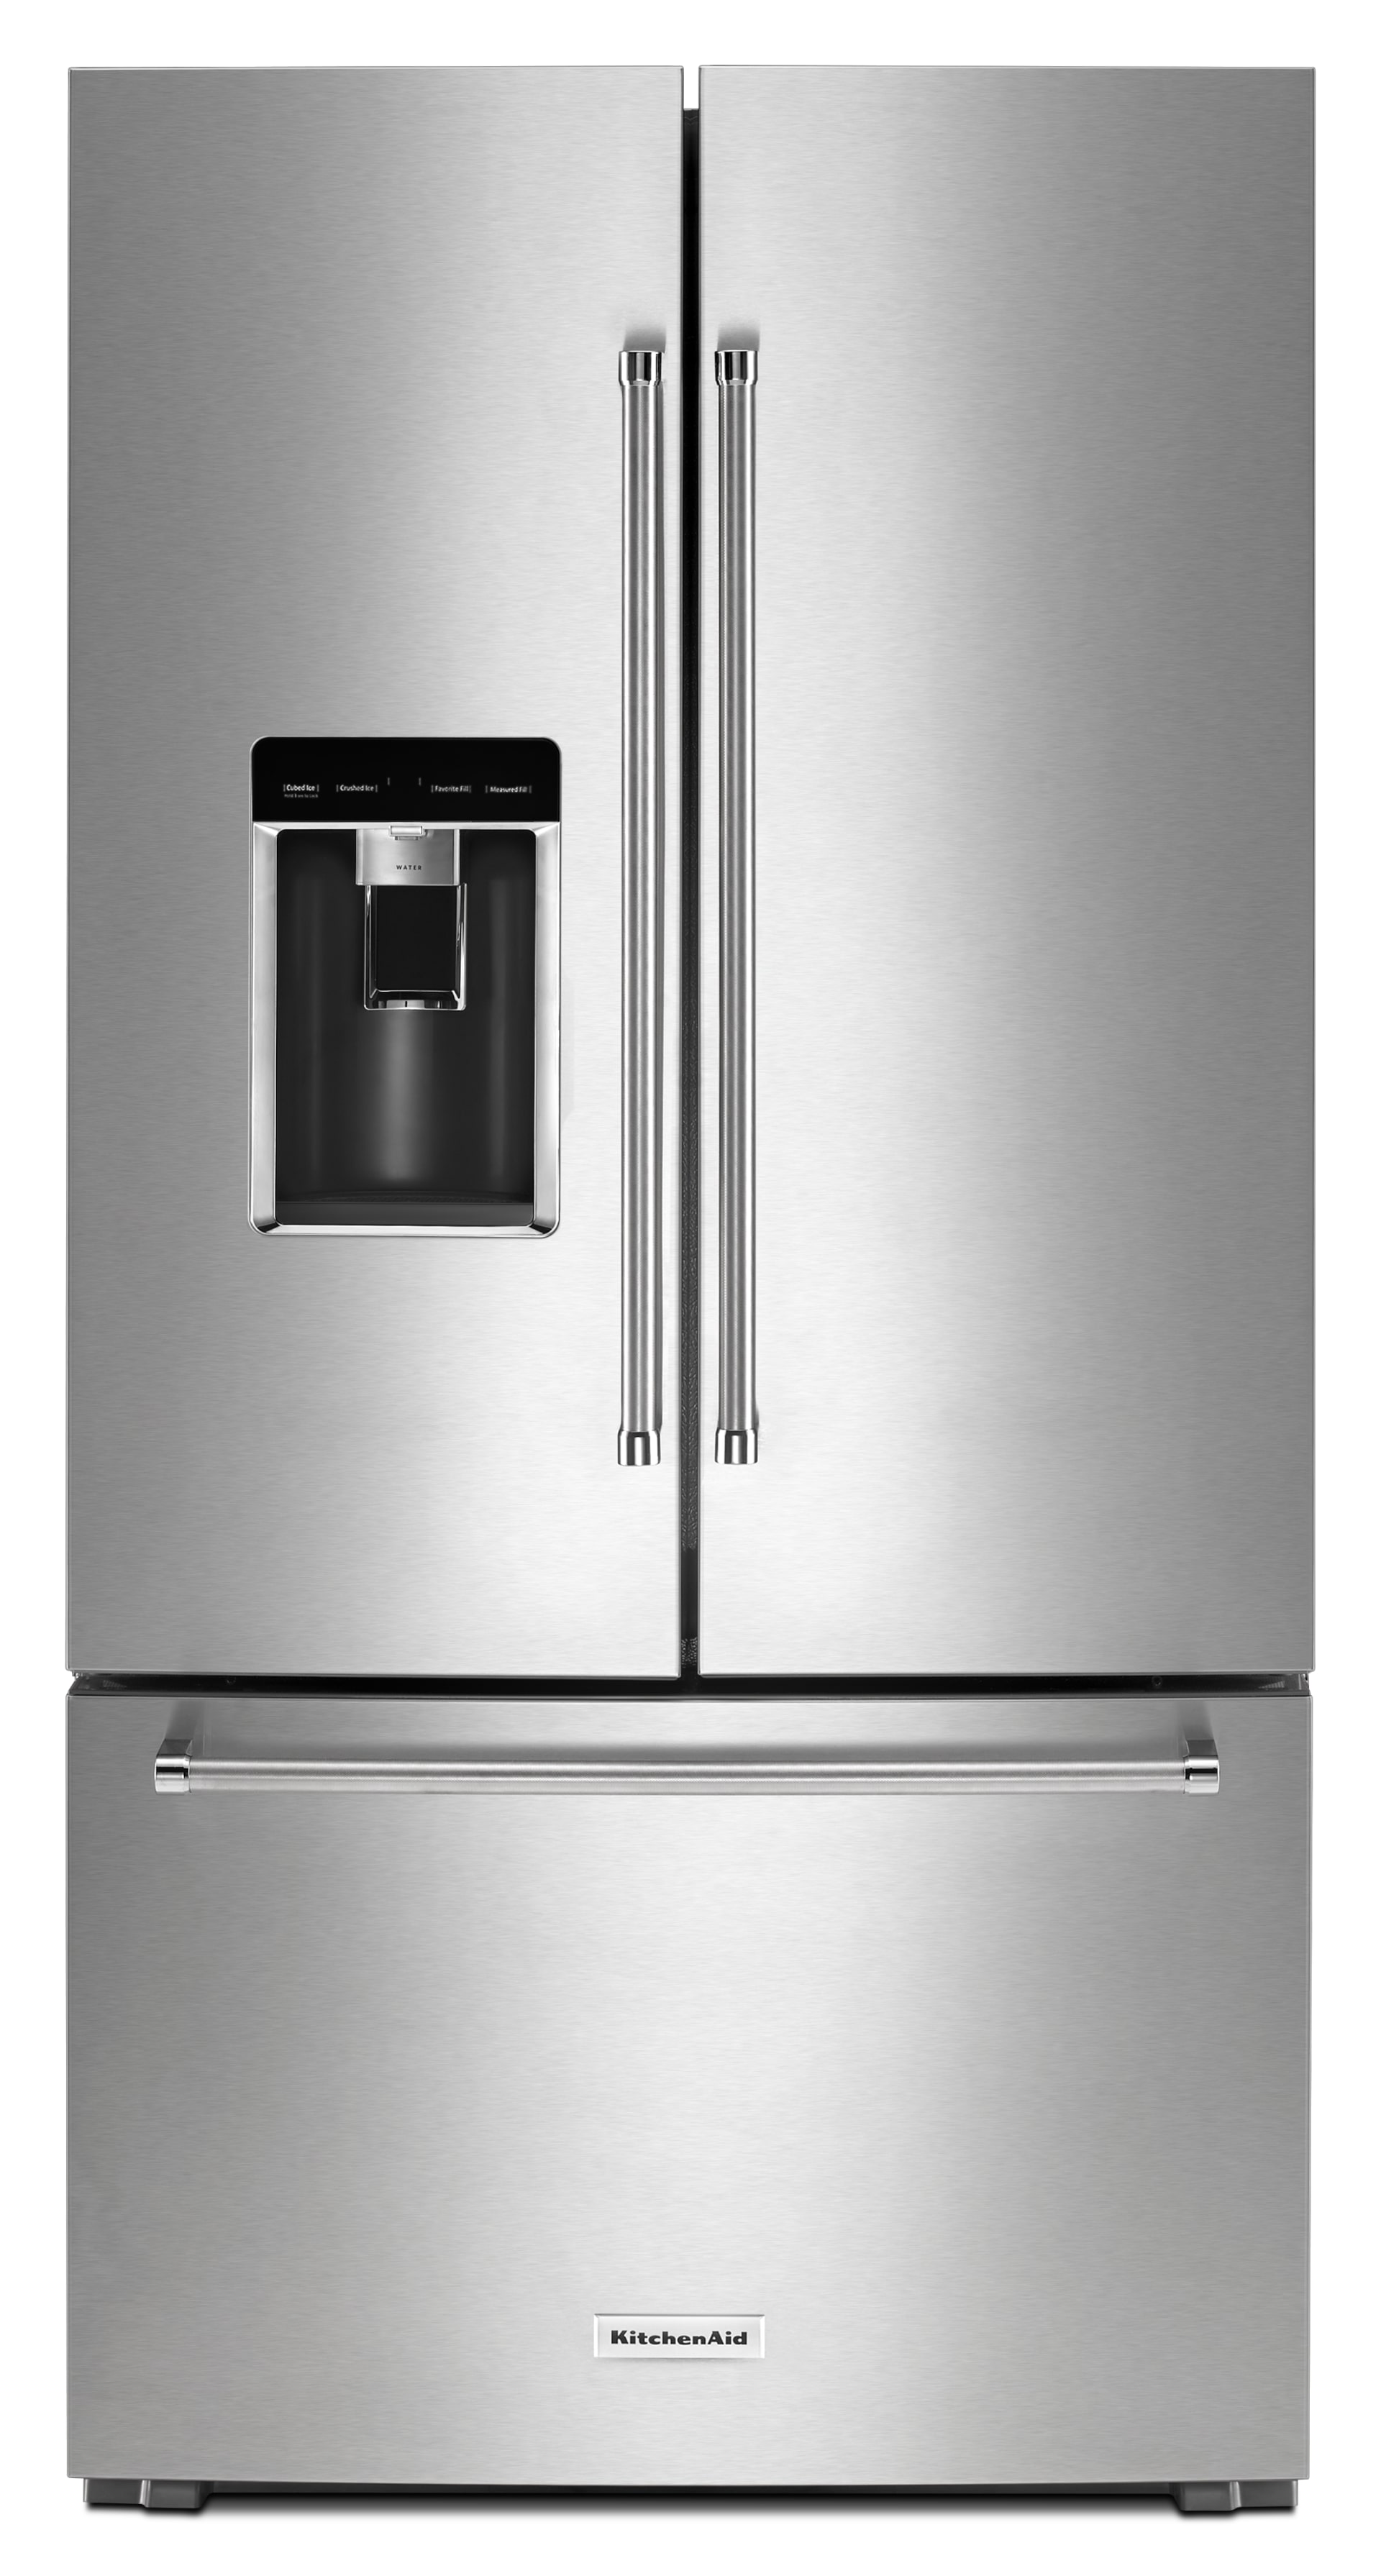 Kitchenaid 238-cu Ft Counter-depth French Door Refrigerator With Ice Maker Stainless Steel Energy Star In The French Door Refrigerators Department At Lowescom